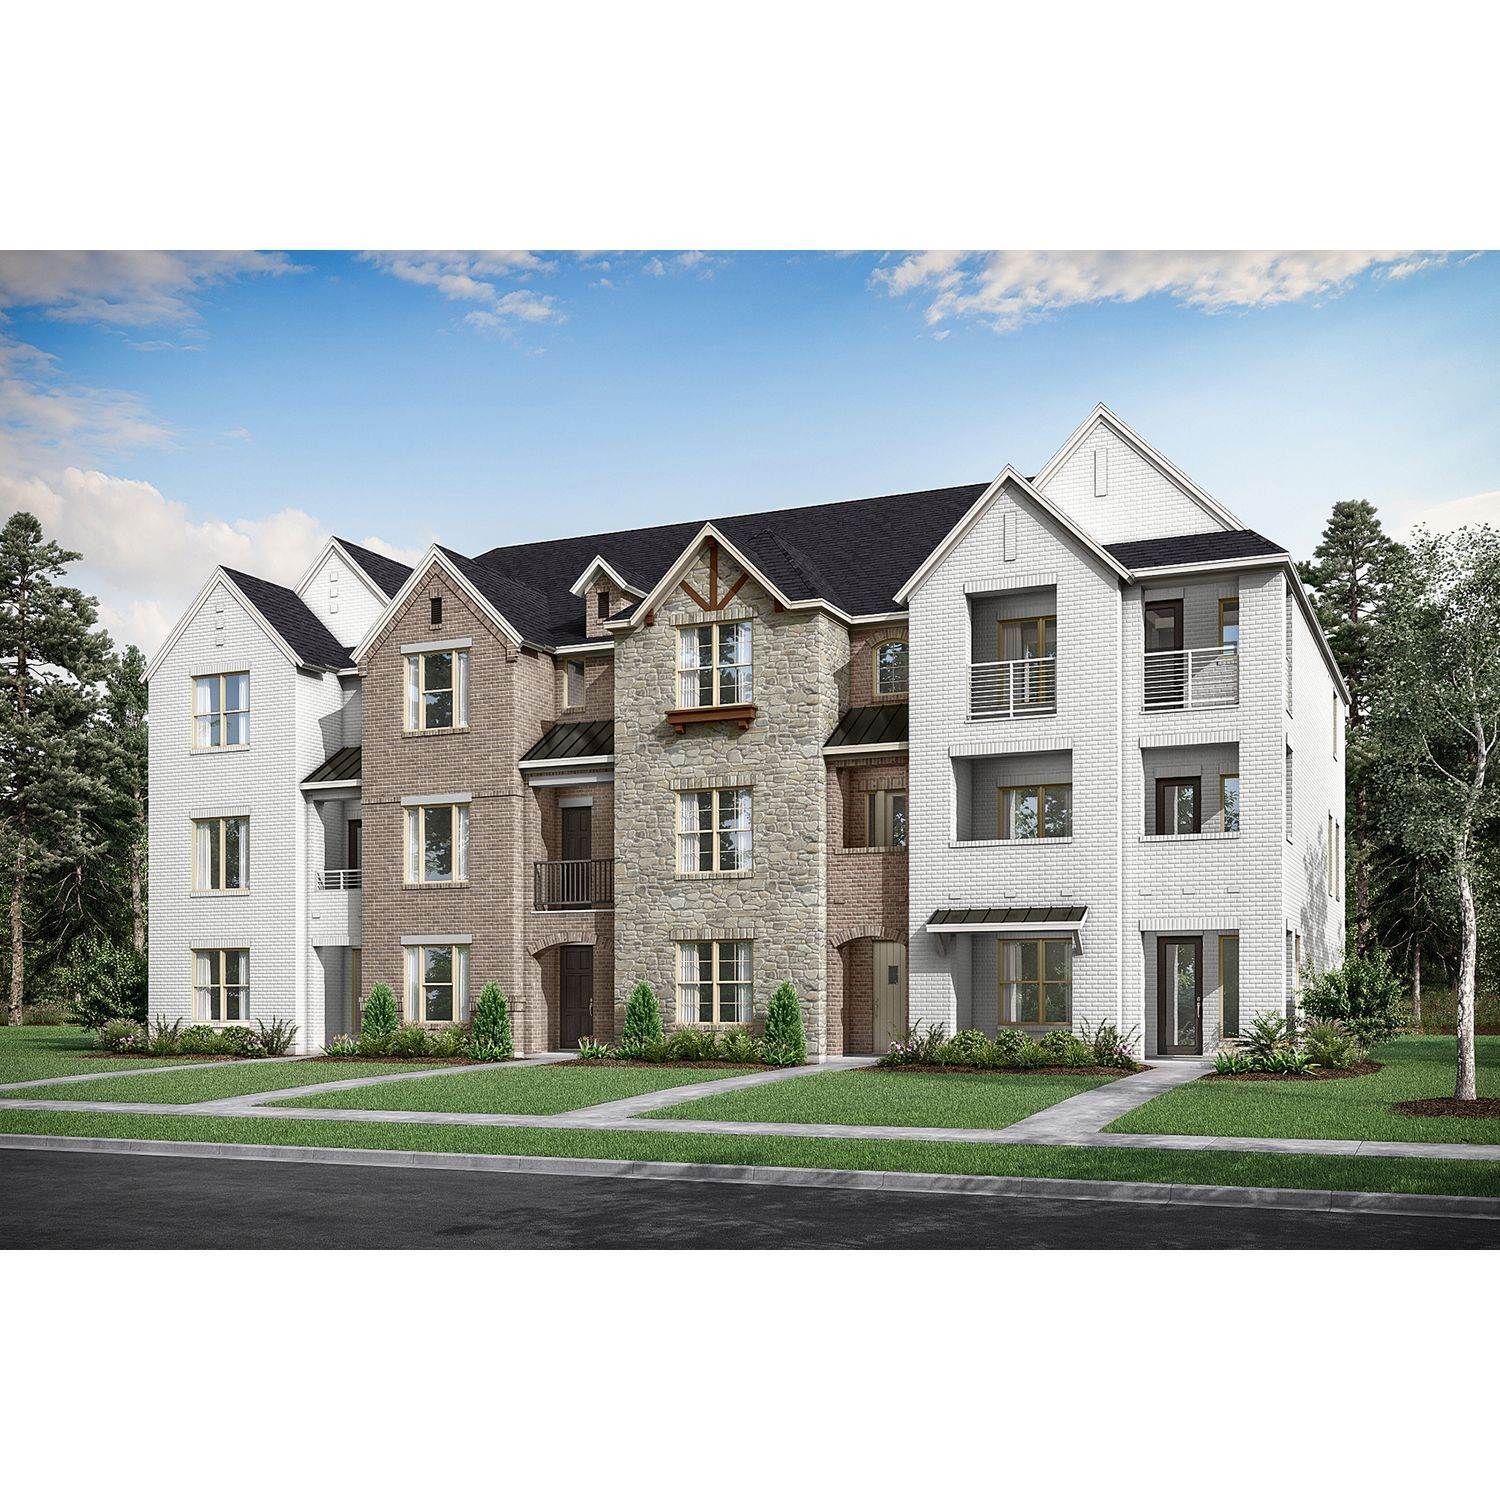 6. Wade Settlement Townhomes building at 4269 Willow Pond Drive, Frisco, TX 75034